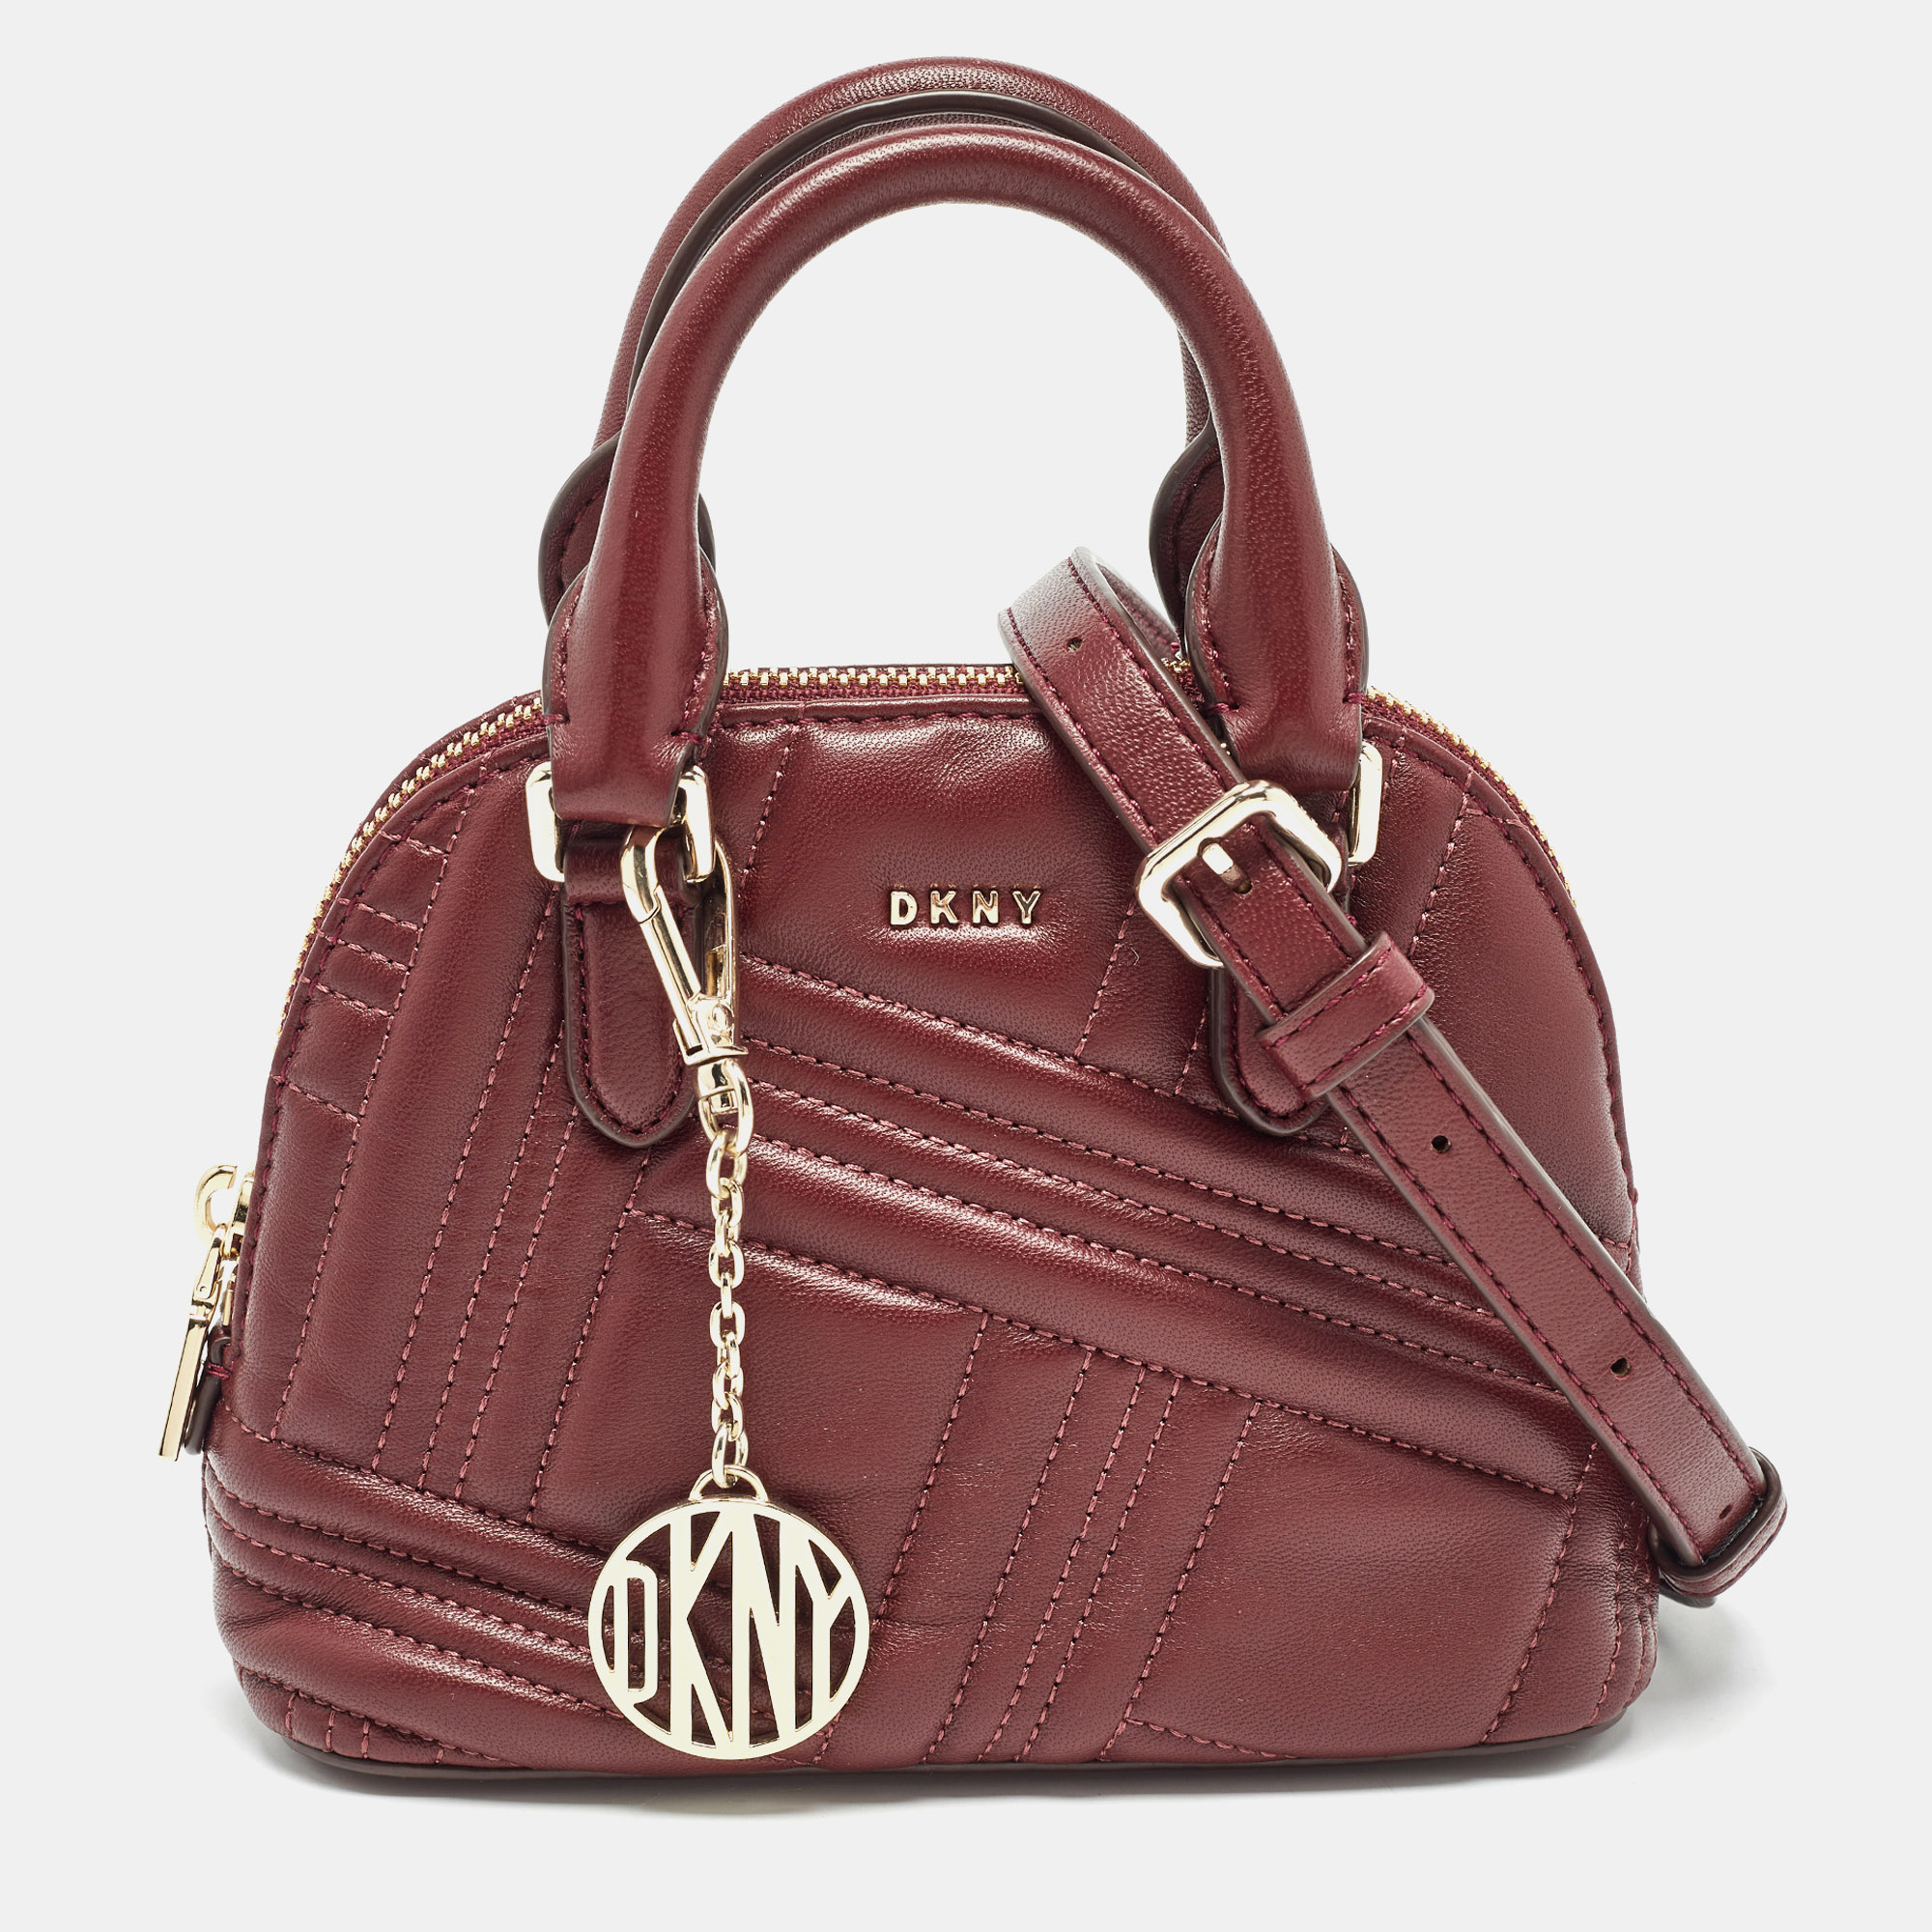 

DKNY Burgundy Quilted Leather Mini Allen Satchel